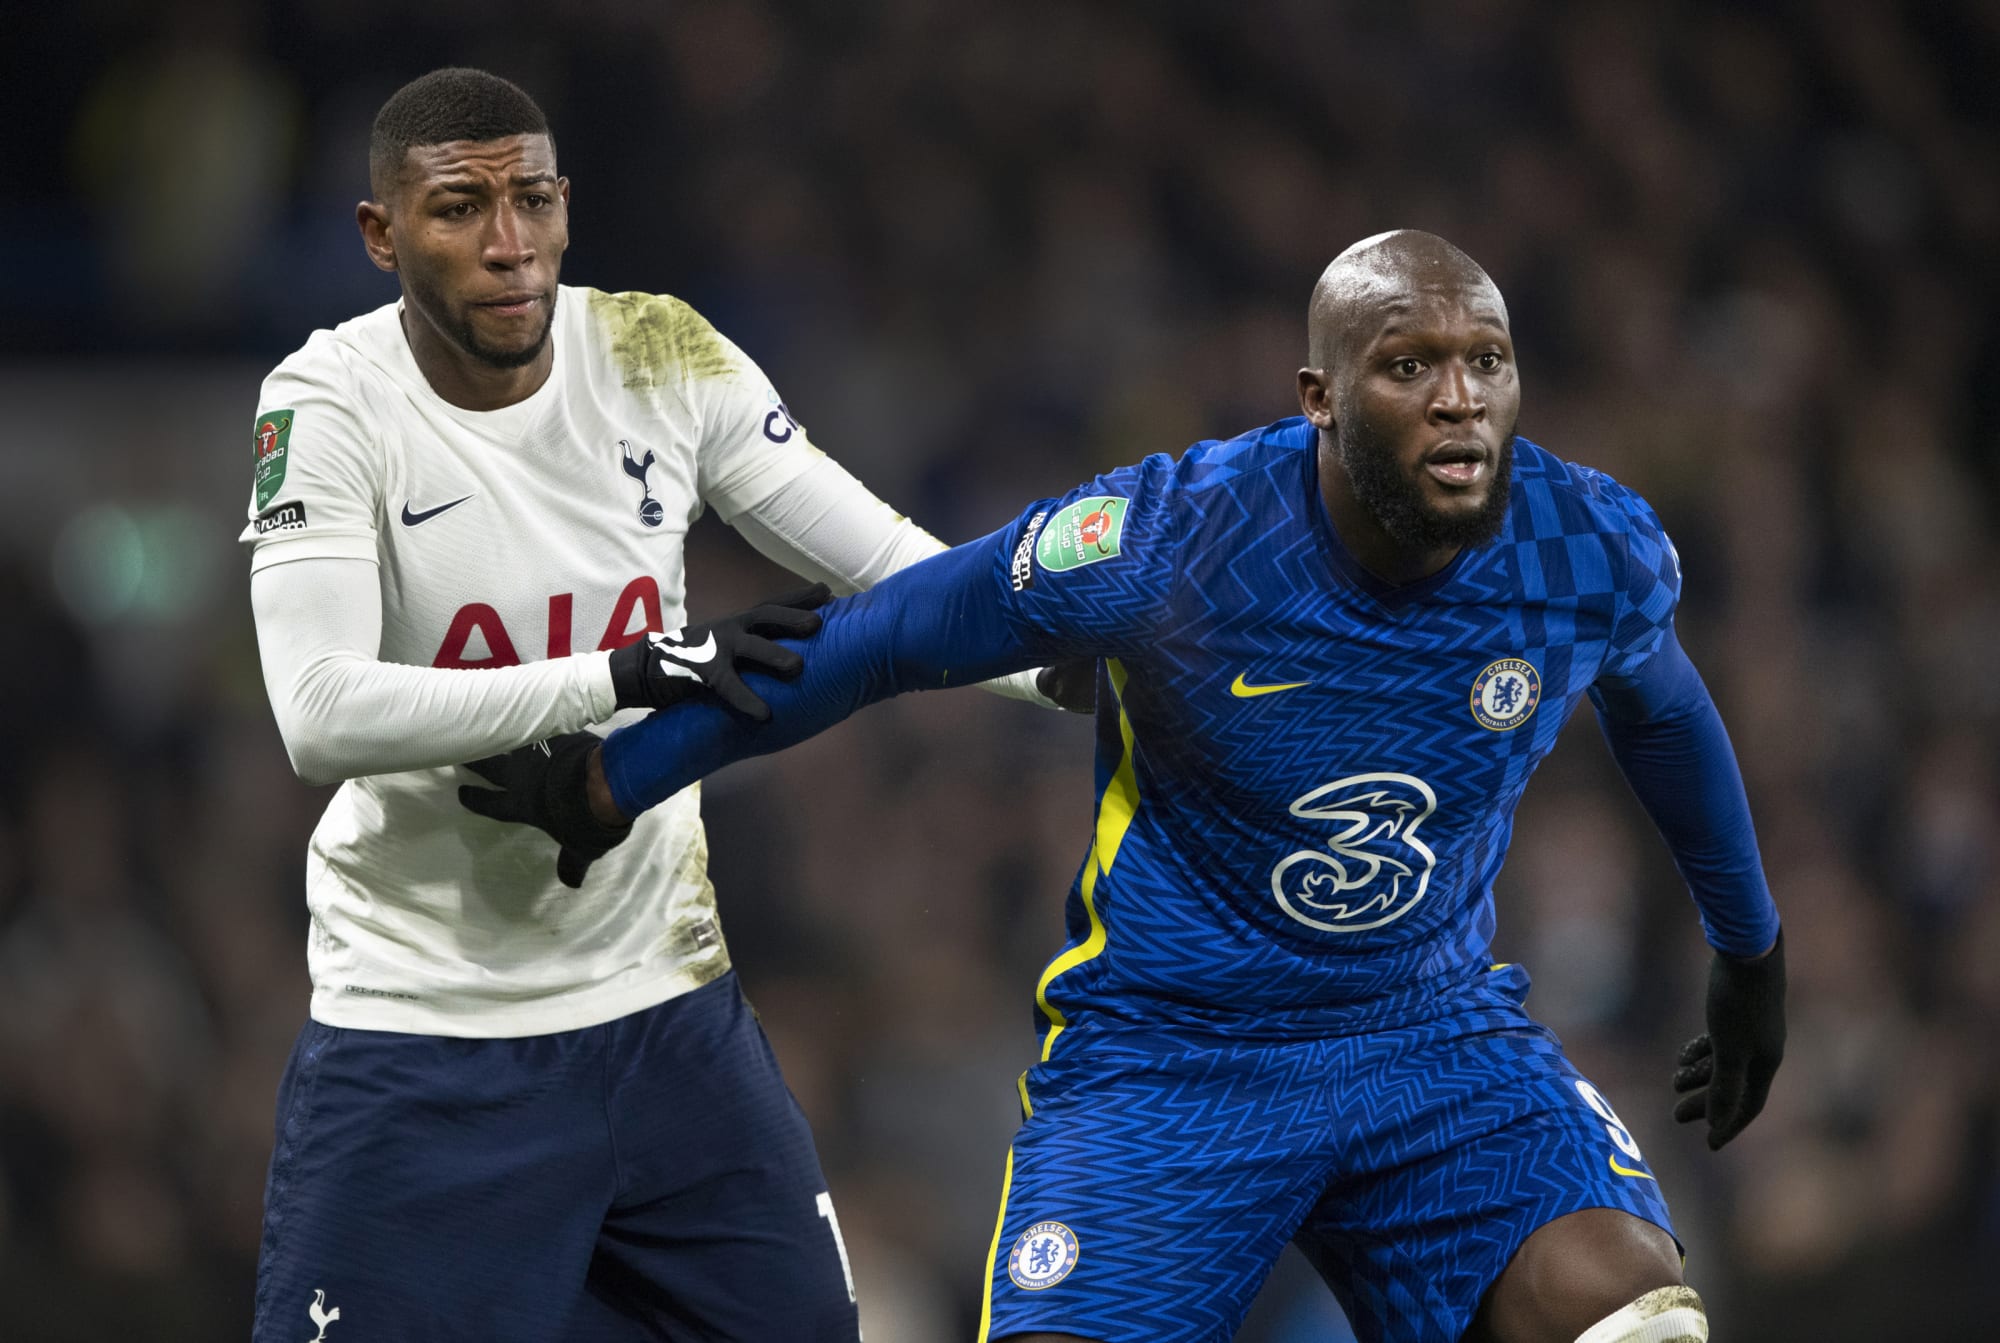 Can Tottenham beat Chelsea in the Carabao Cup second leg?